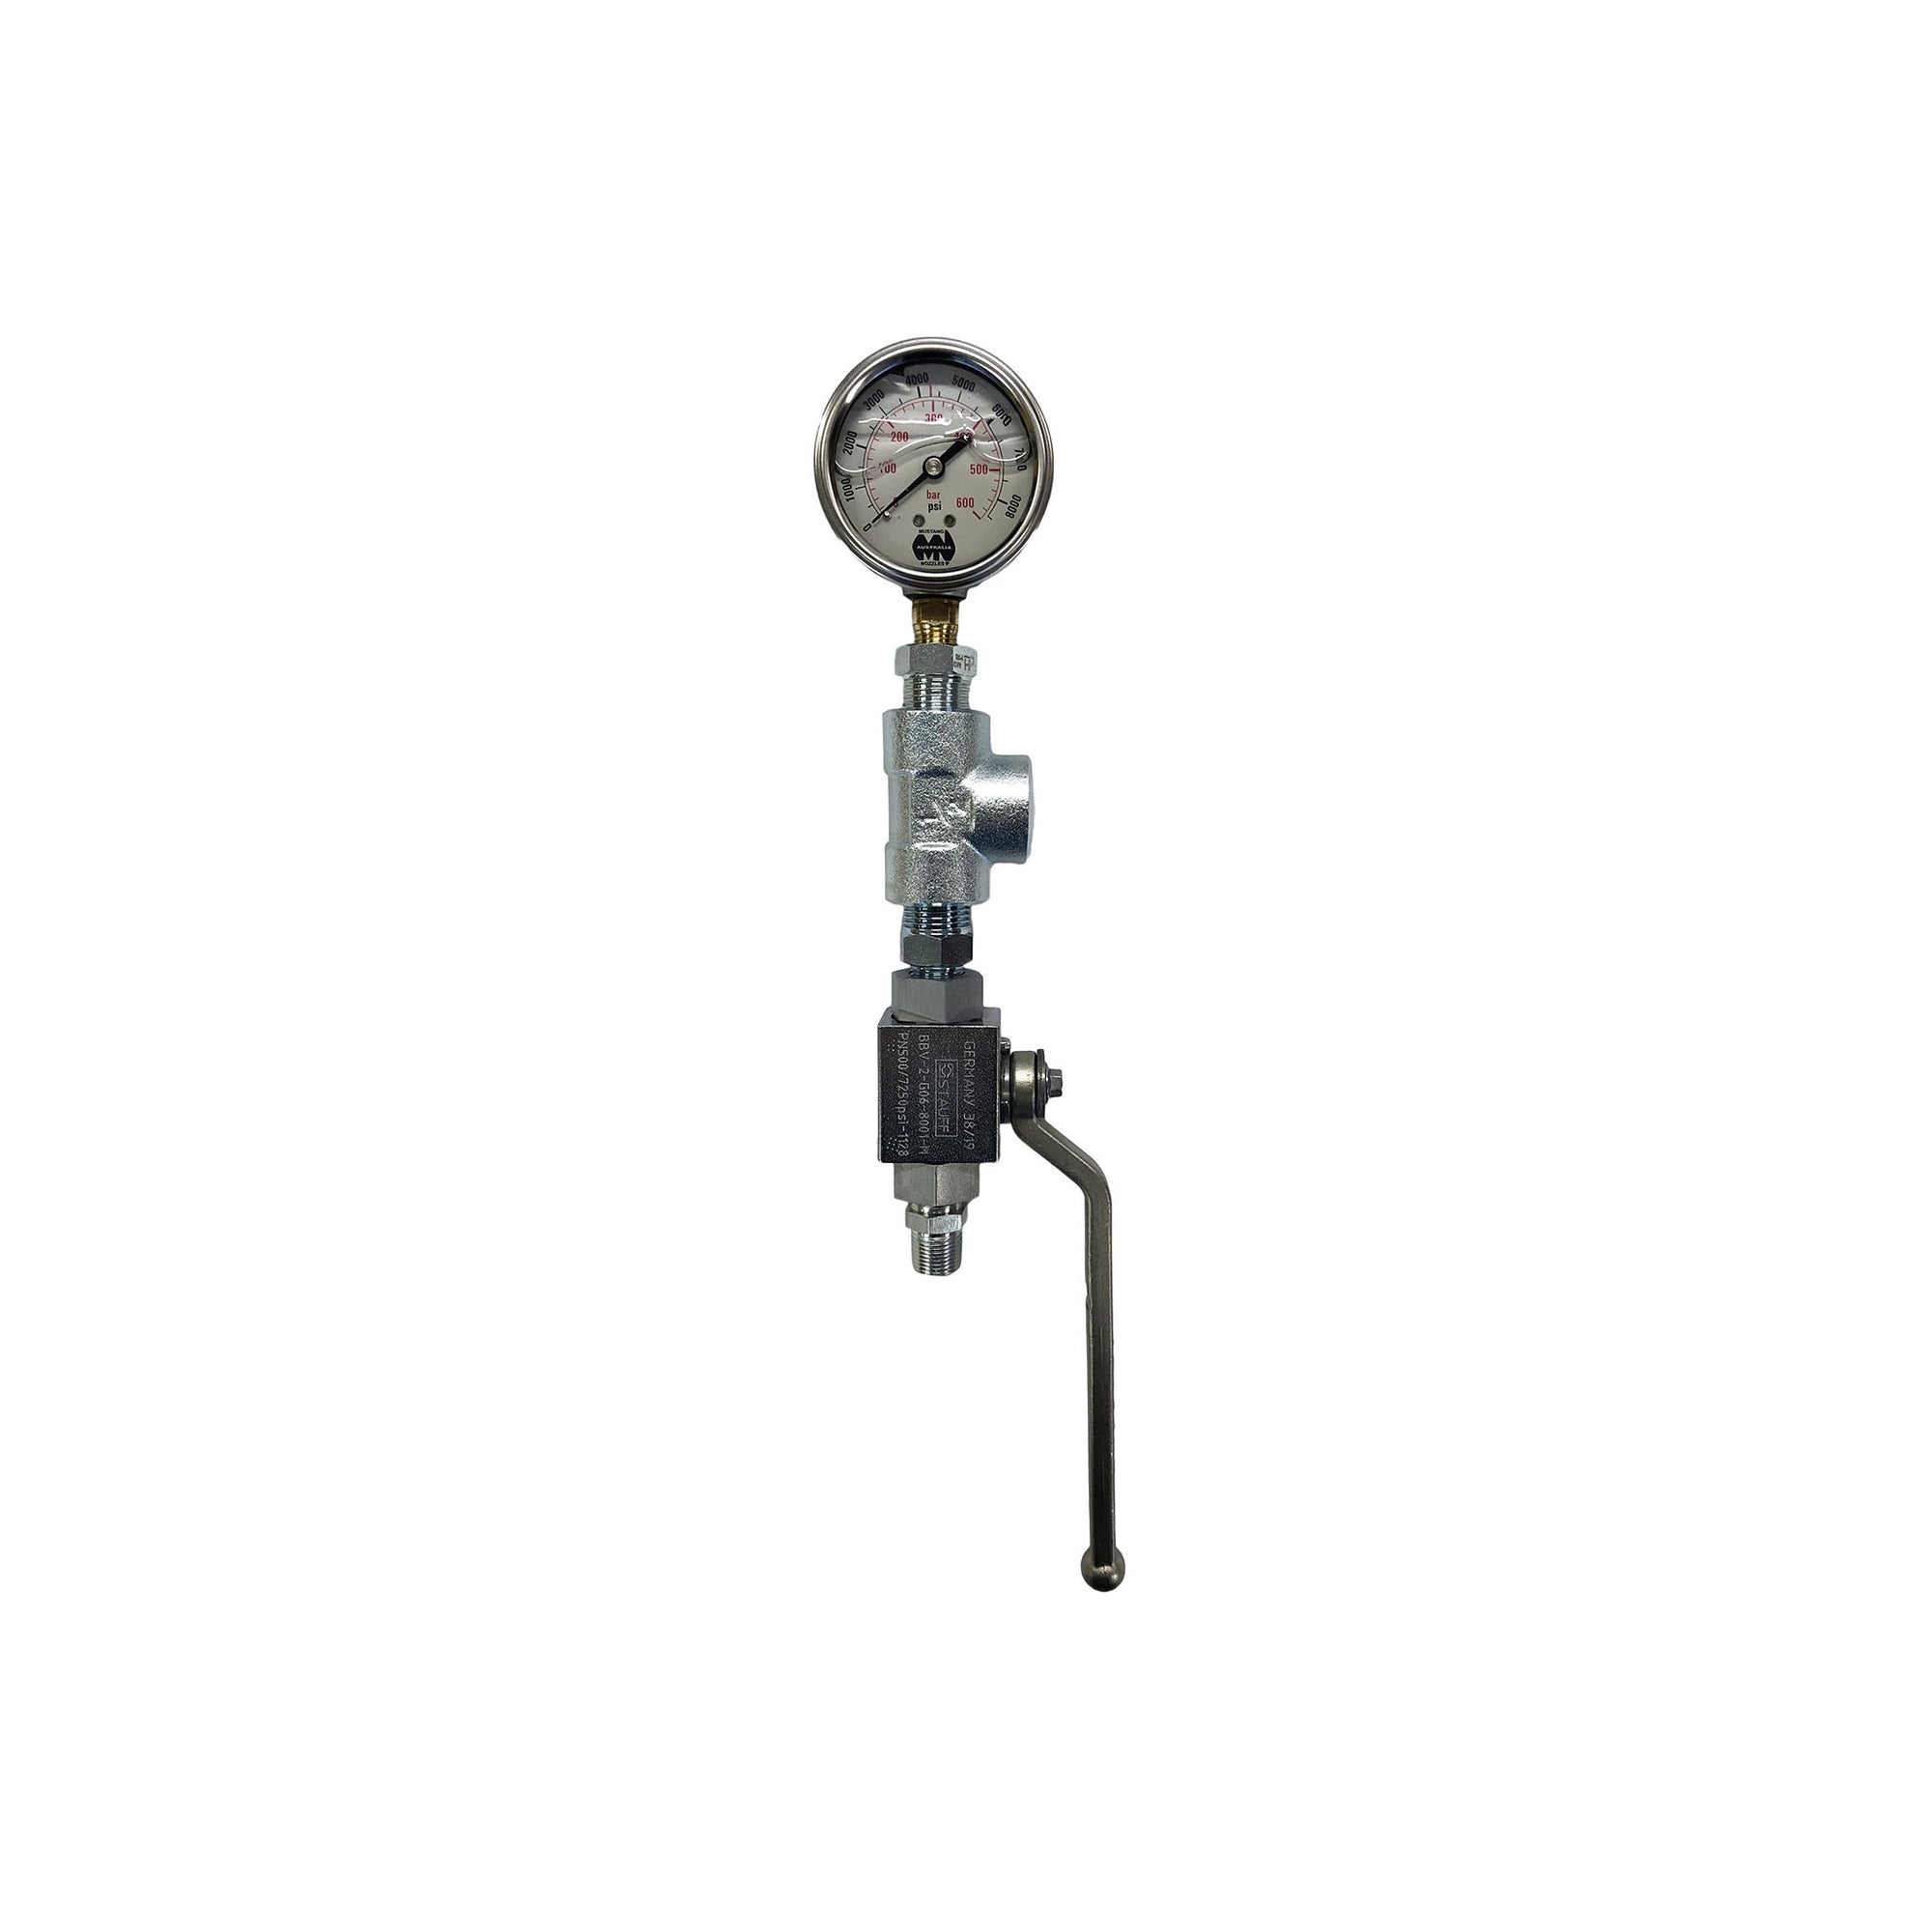 Ball Valve and Pressure Gauge Assembly